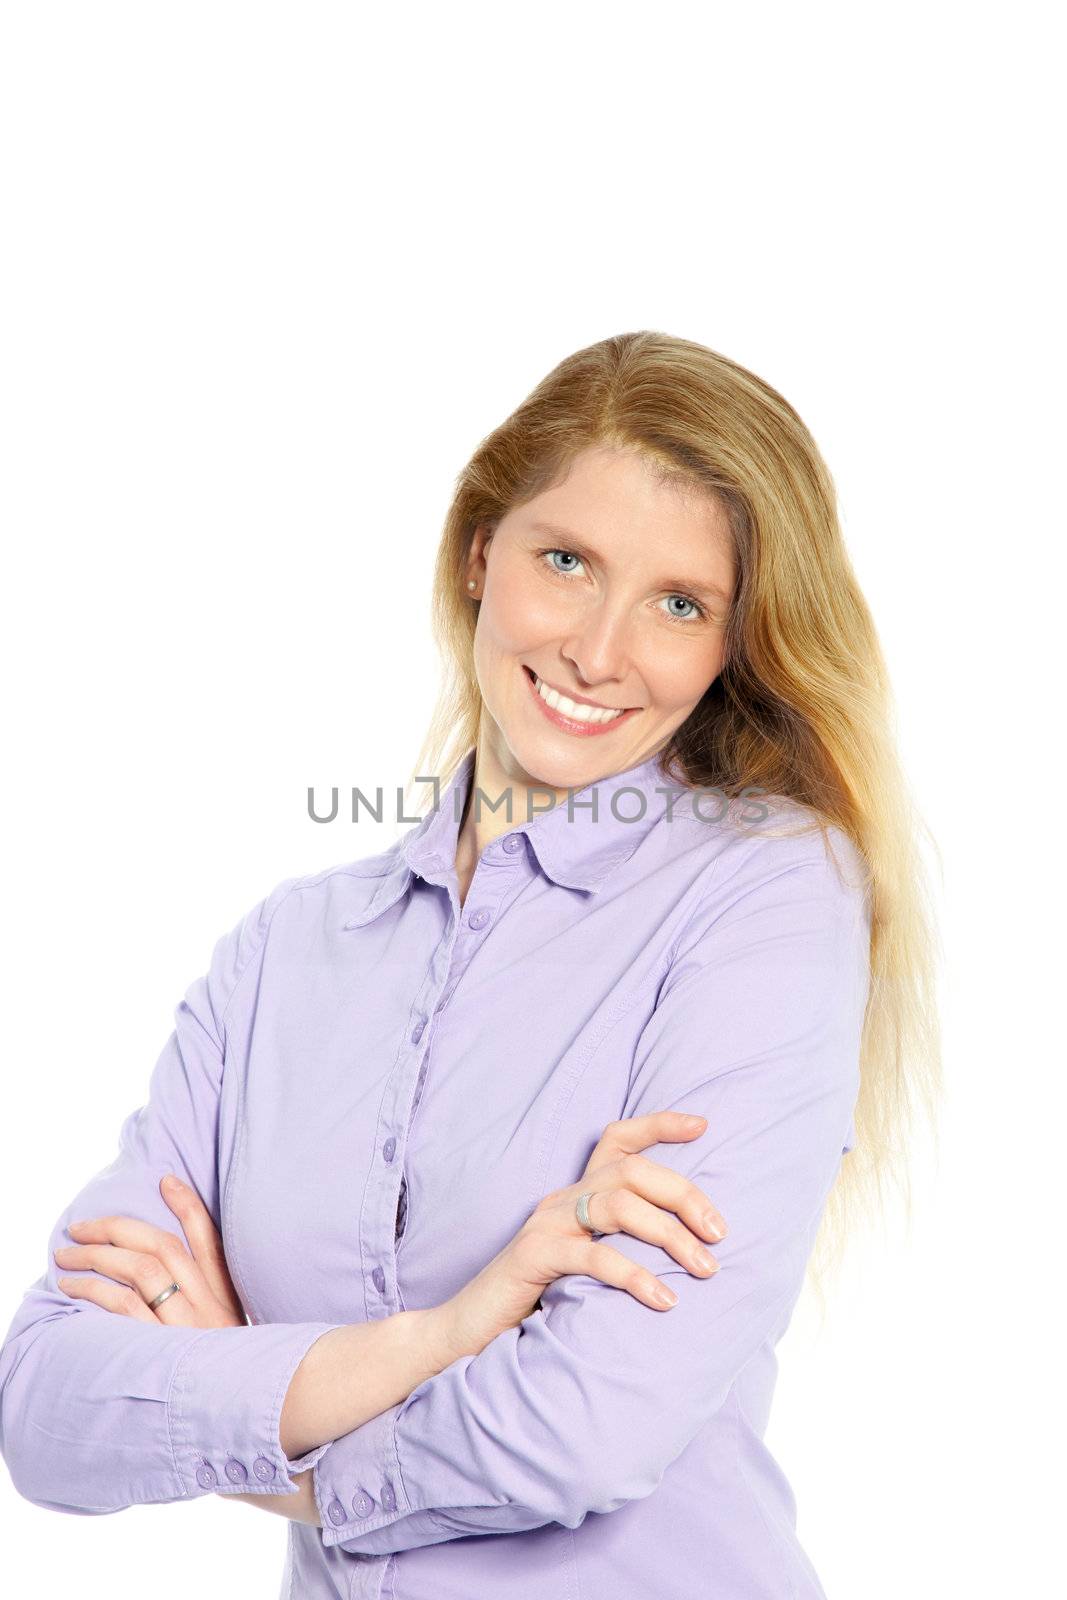 Portrait of an attractive caucasian woman with her arms folded smiling at the camera.